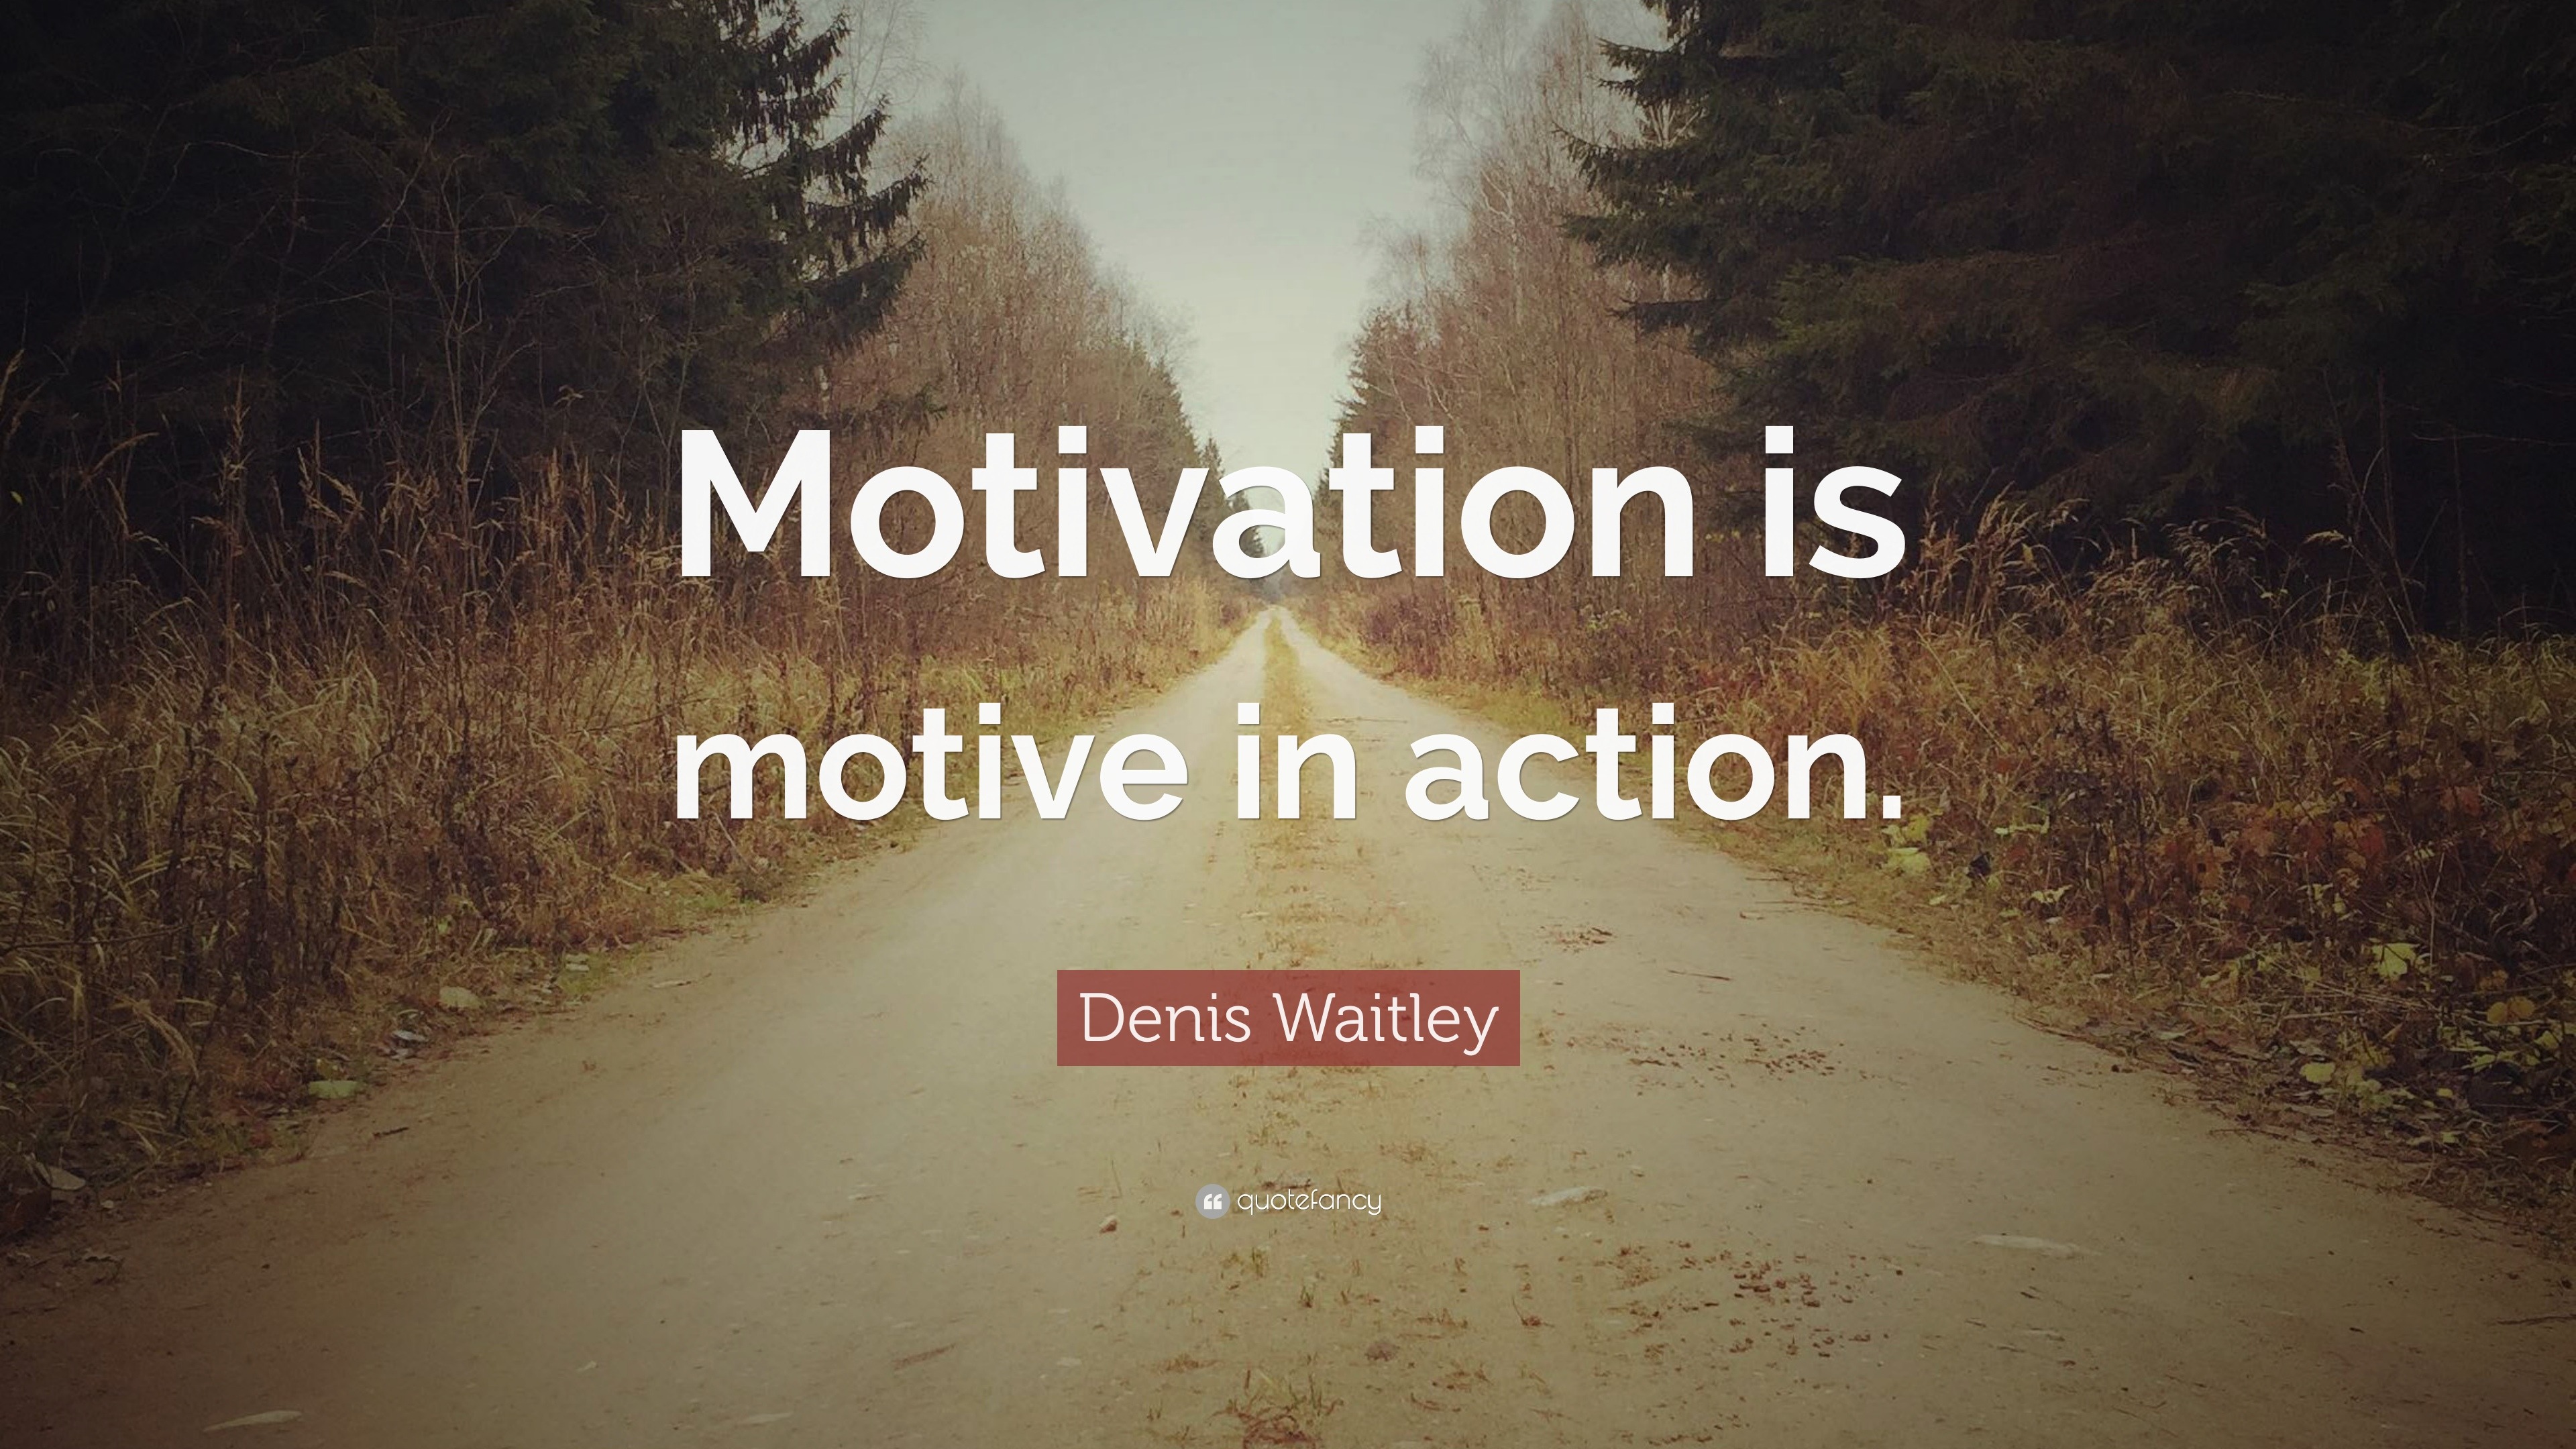 “Motivation is motive in action.”